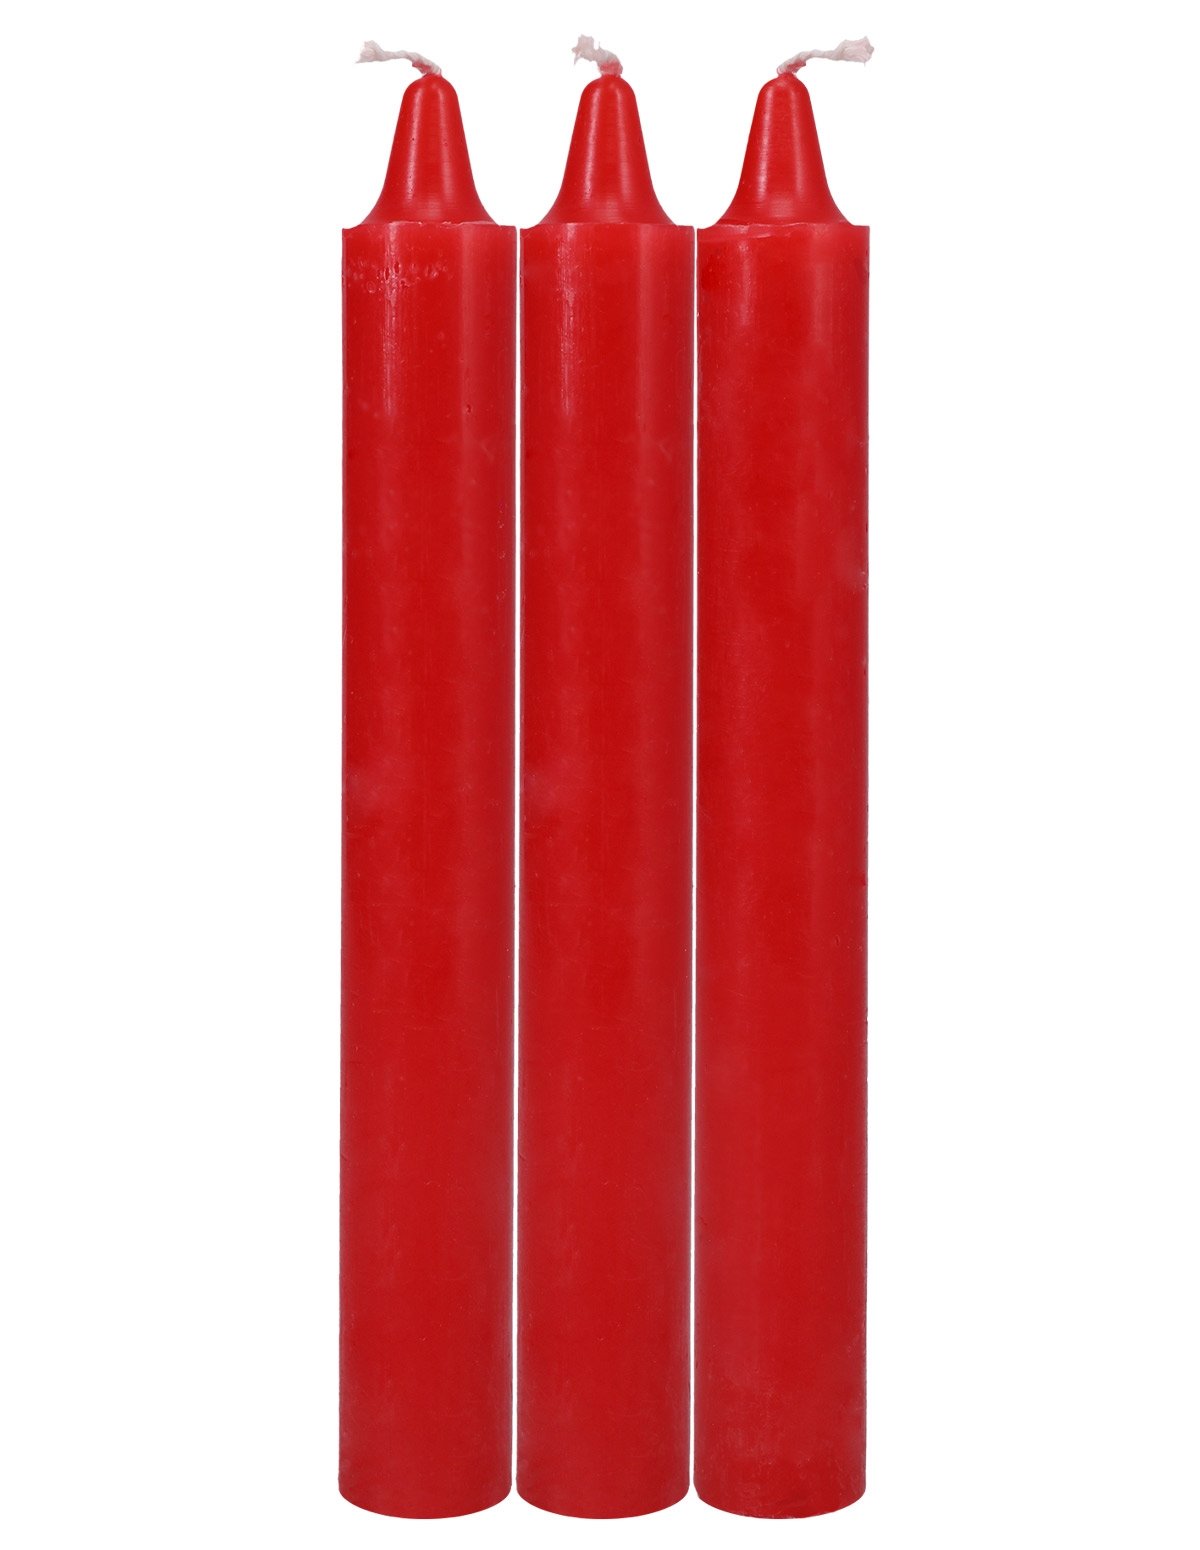 alternate image for Japanese Drip Red Candles 3 Pack - Hot Wax Play